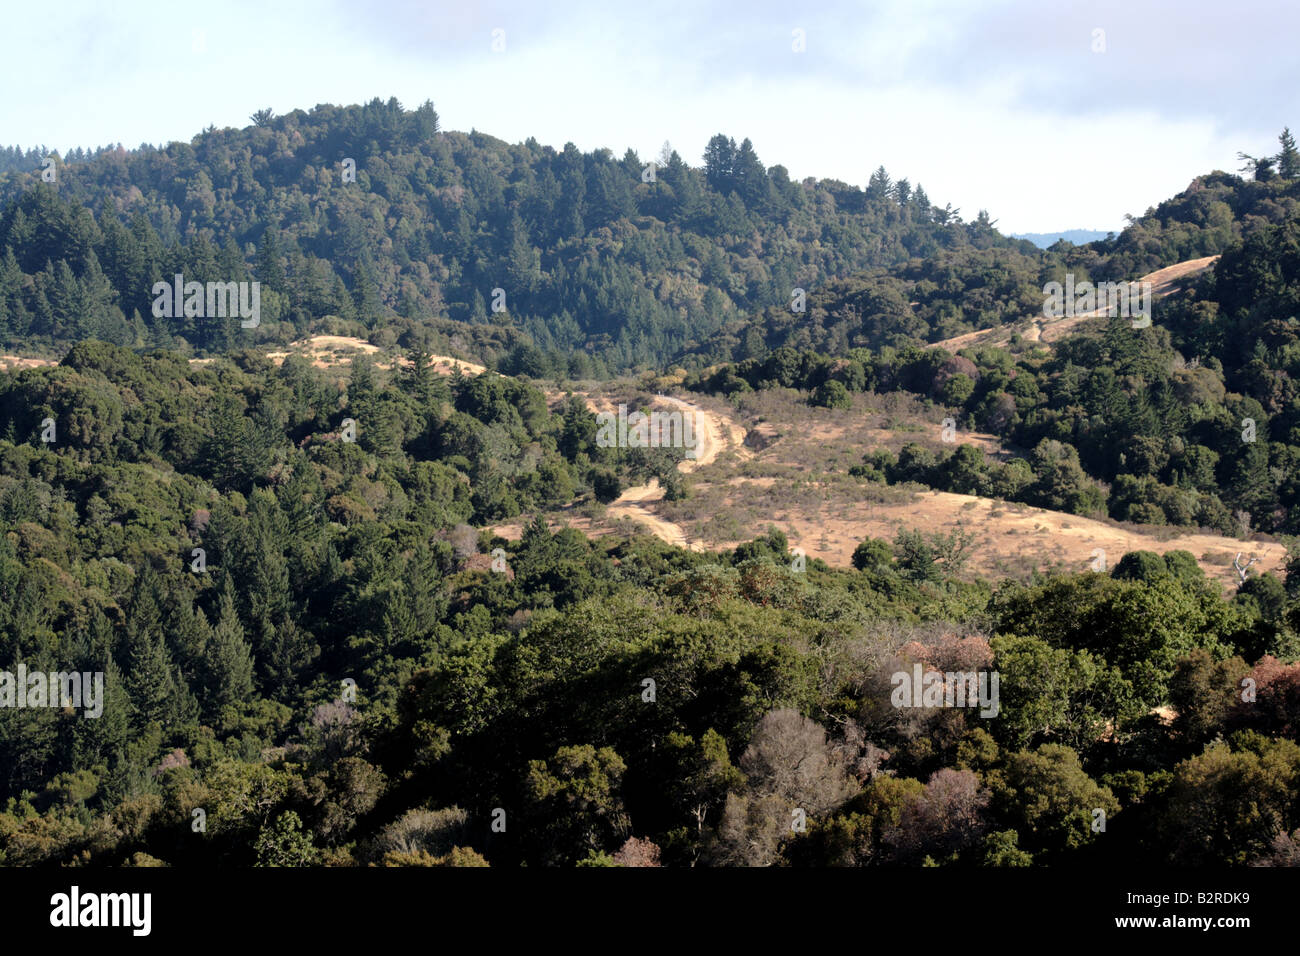 a heavily -forested area in a California open space nature preserve Stock Photo